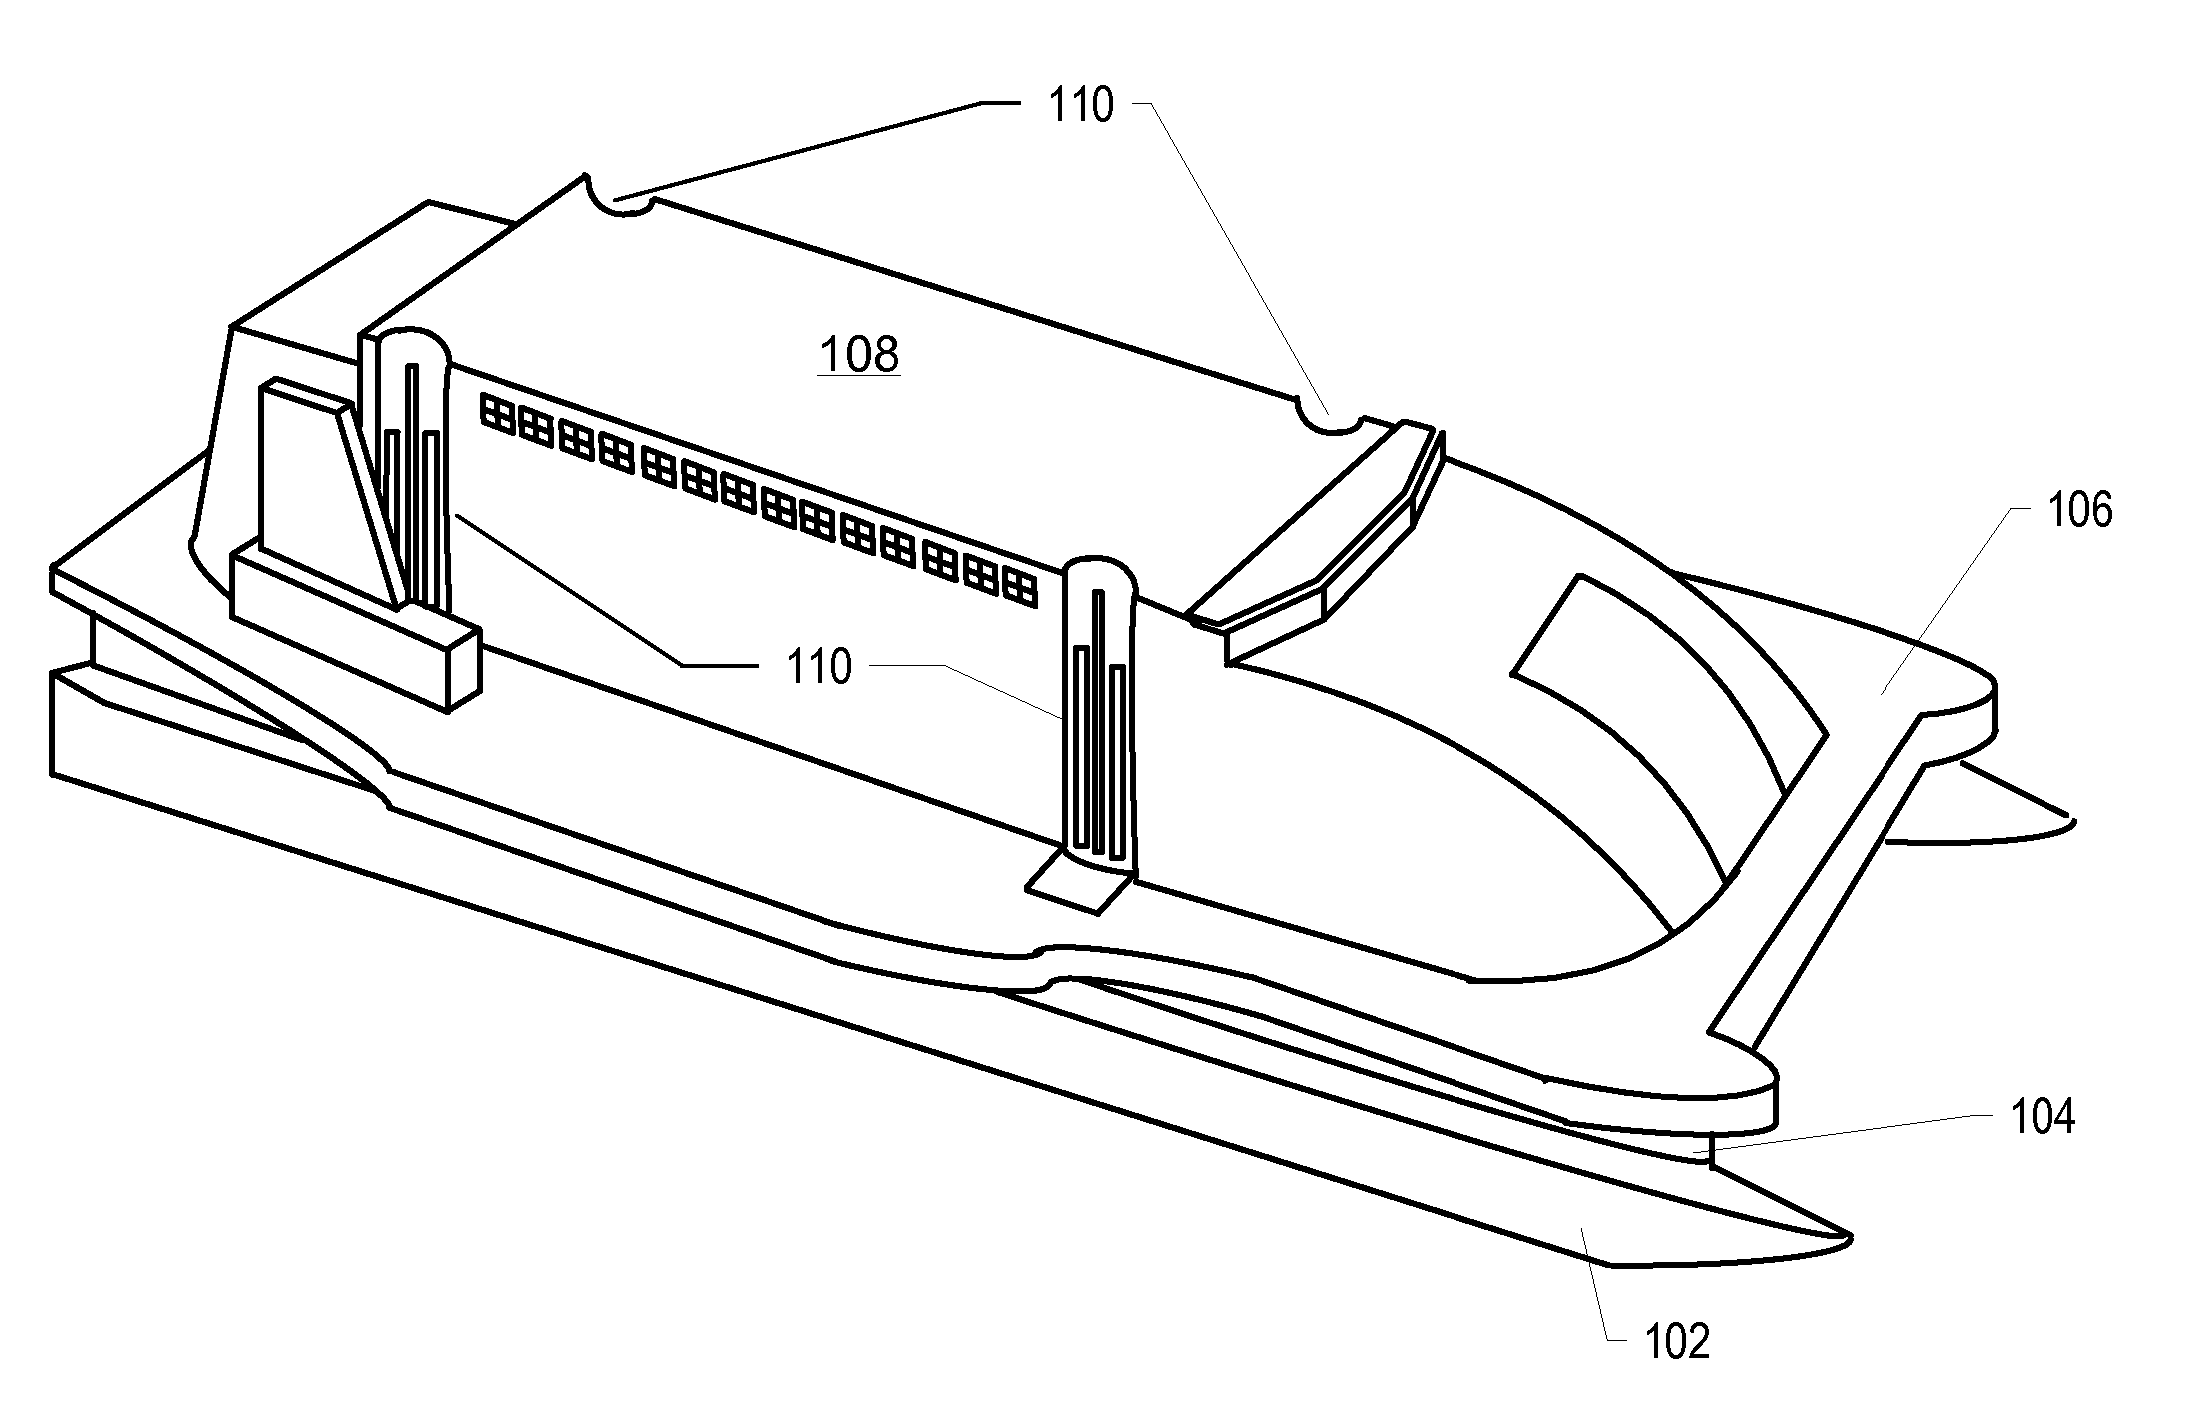 Method and Apparatus for Ballast-Assisted Reconfiguration of a Variable-Draft Vessel